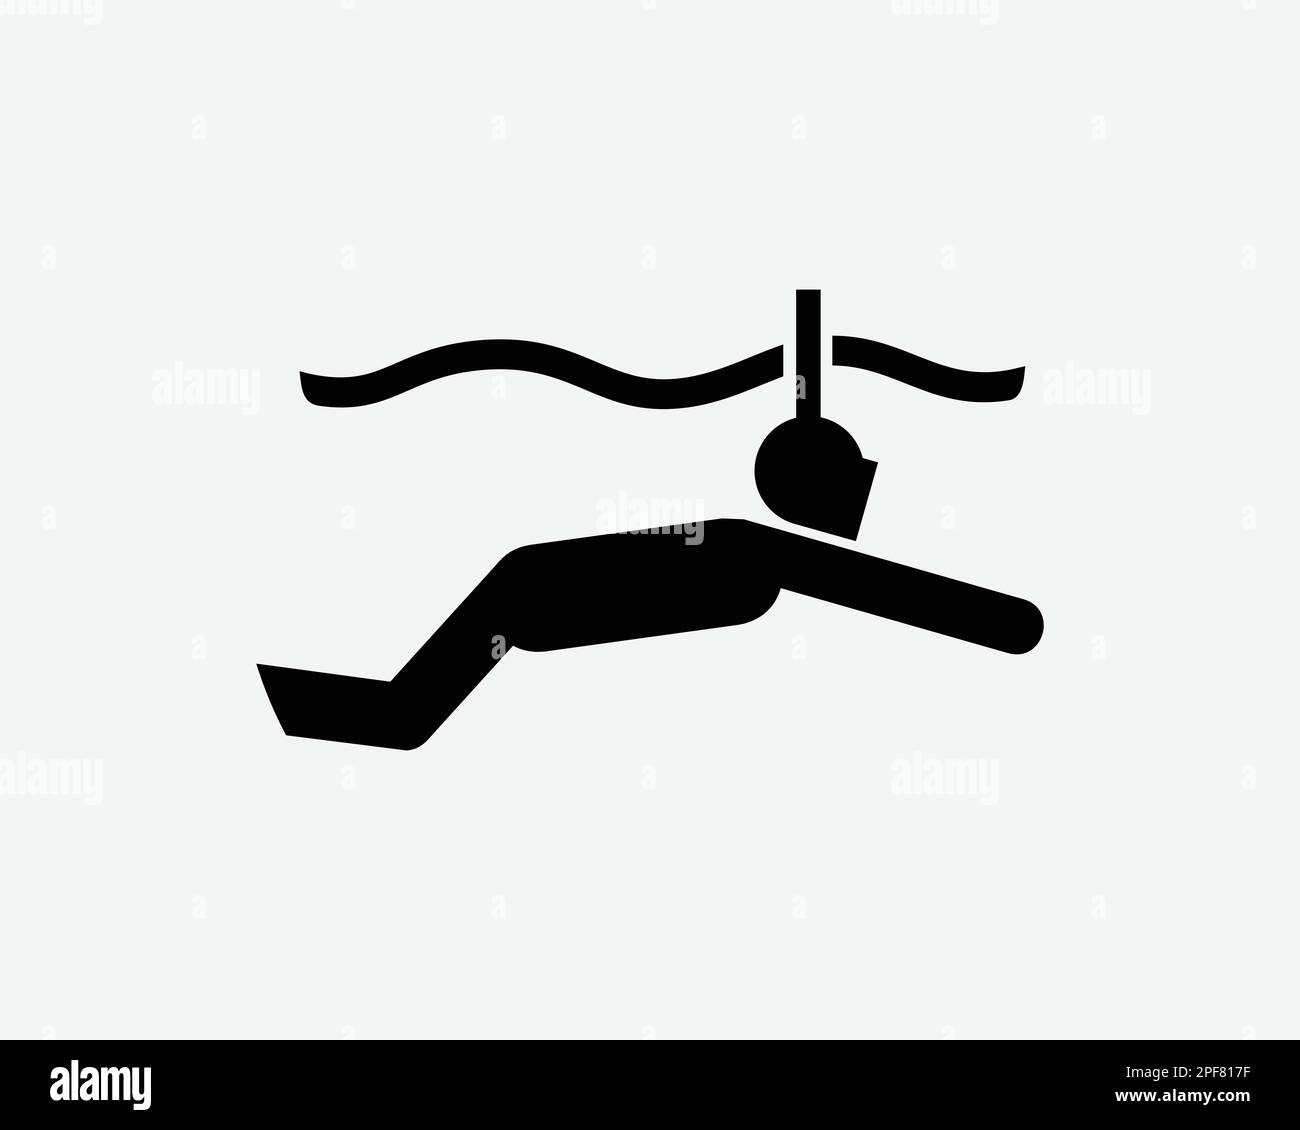 Snorkeling Icon Snorkel Man Dive Diving Water Sport Activity Vector Black White Silhouette Symbol Sign Graphic Clipart Artwork Illustration Pictogram Stock Vector